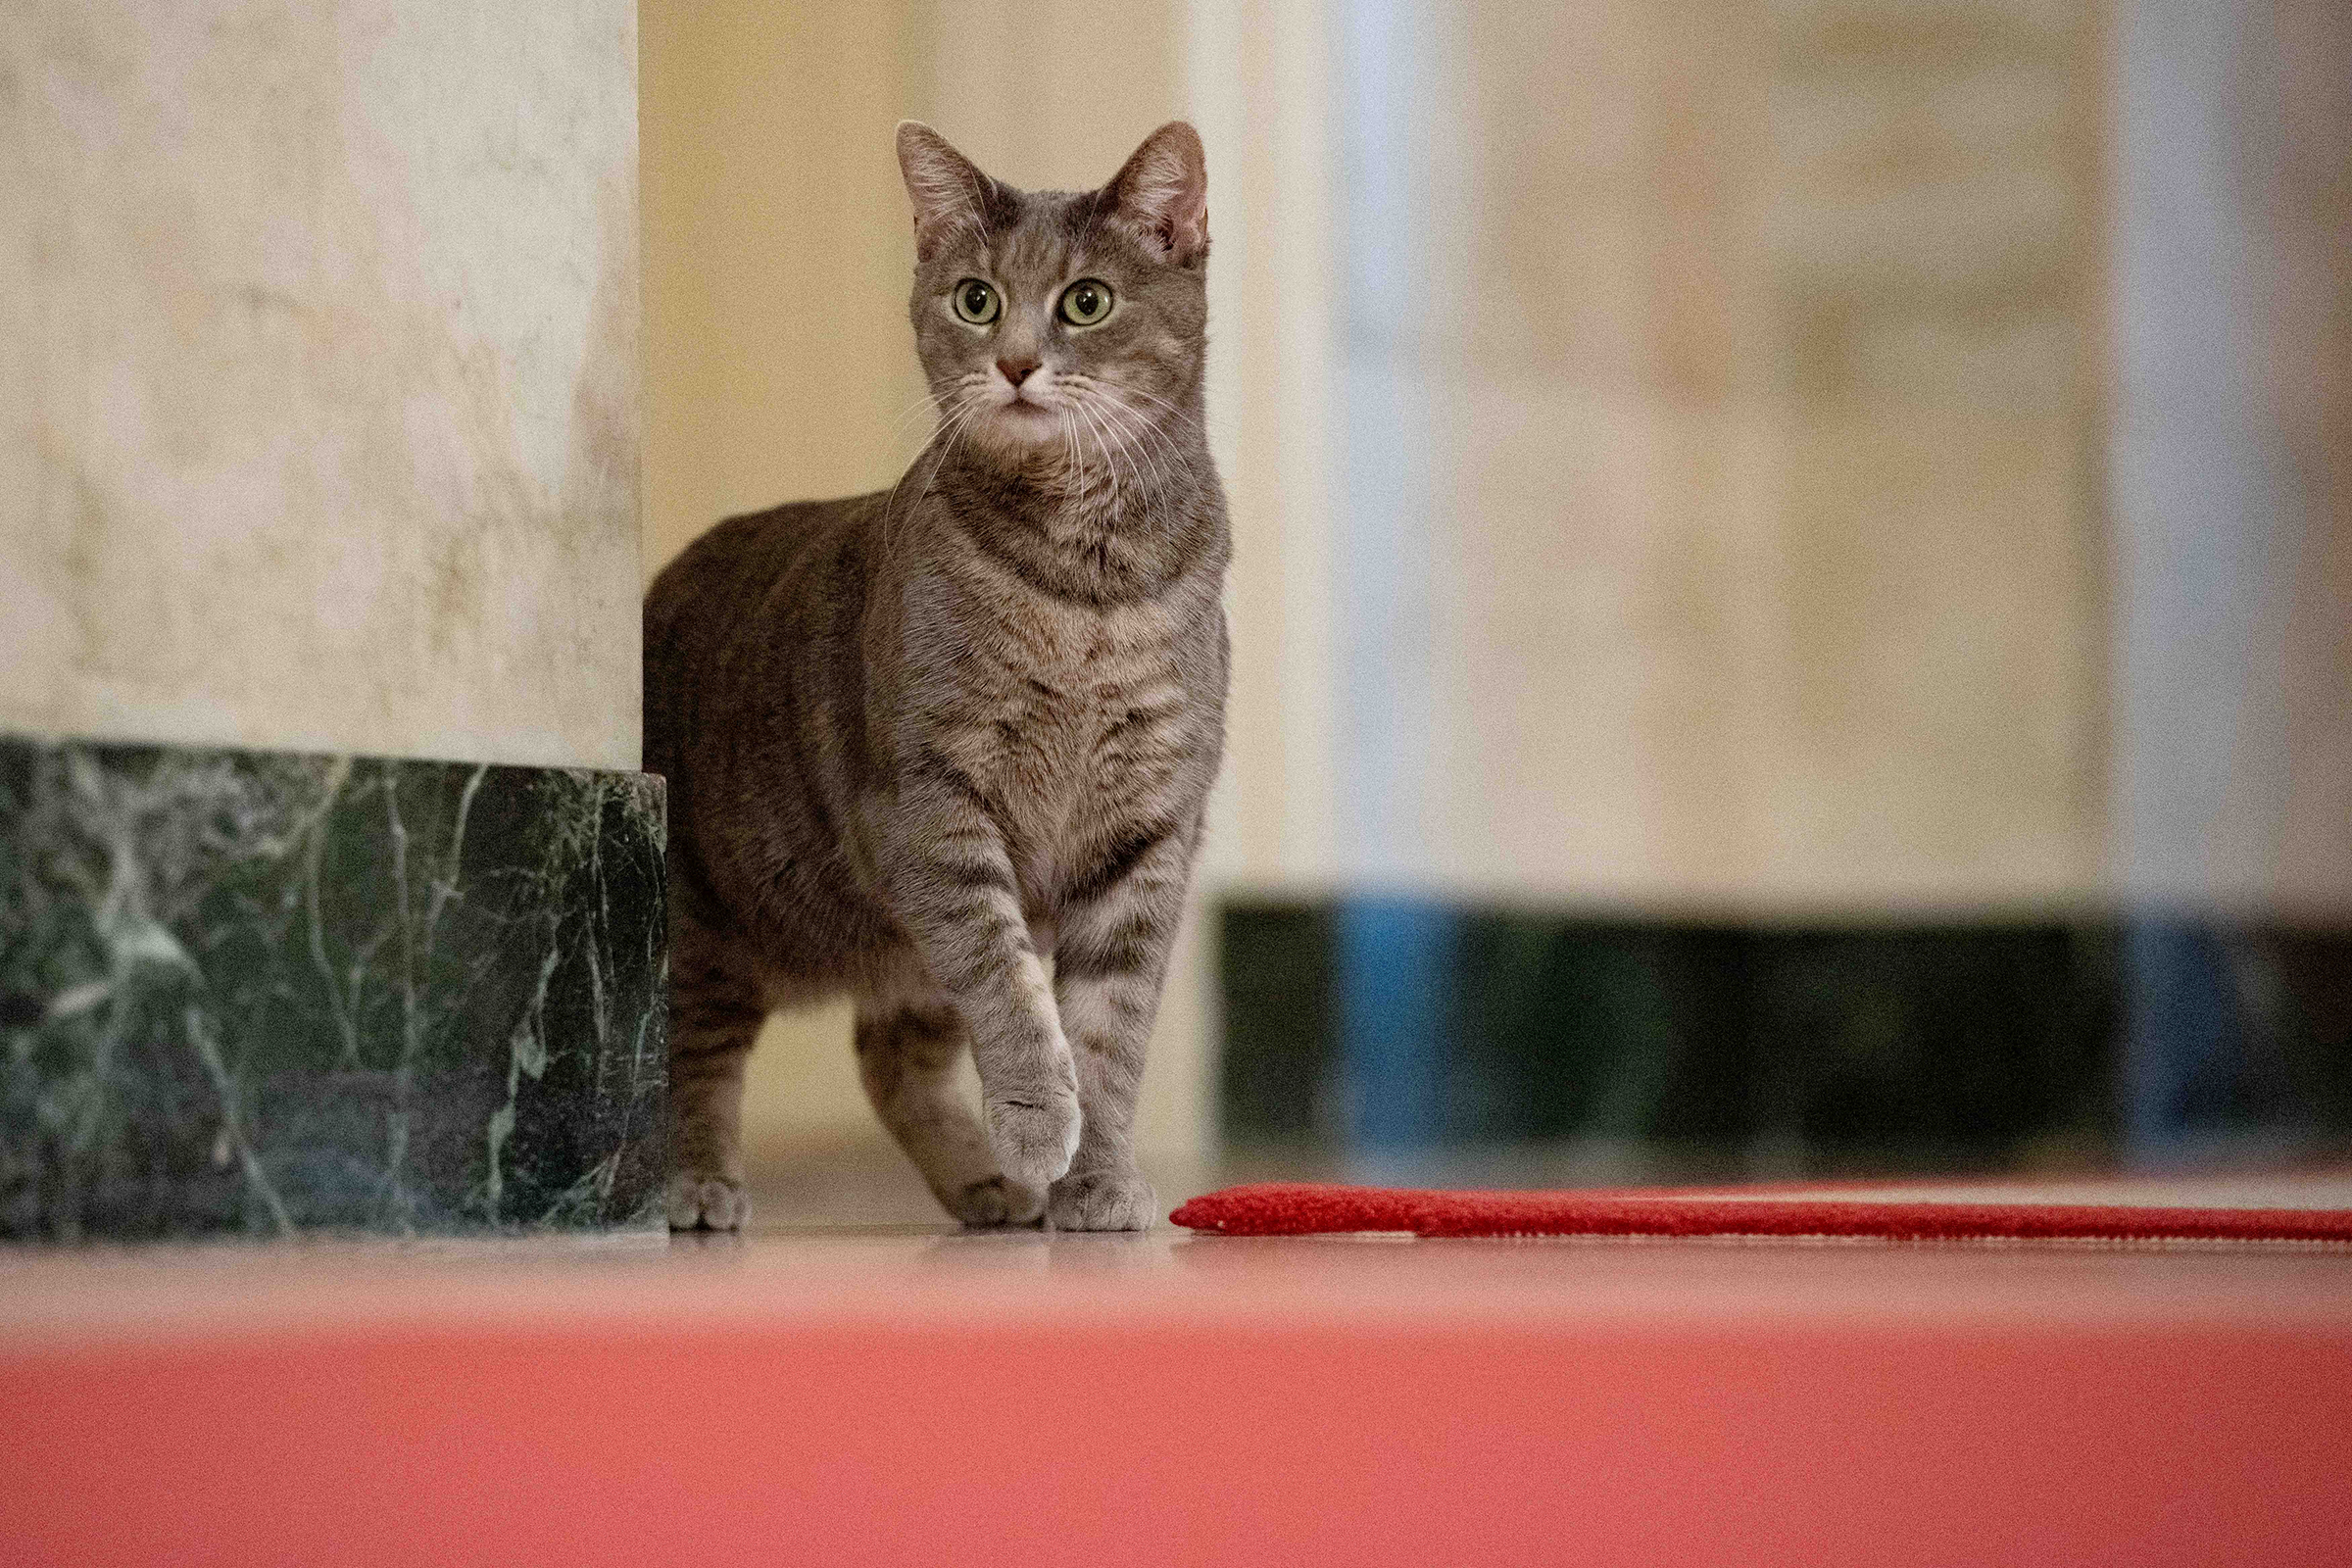 Biden family’s new pet cat Willow is seen at the White House in Washington